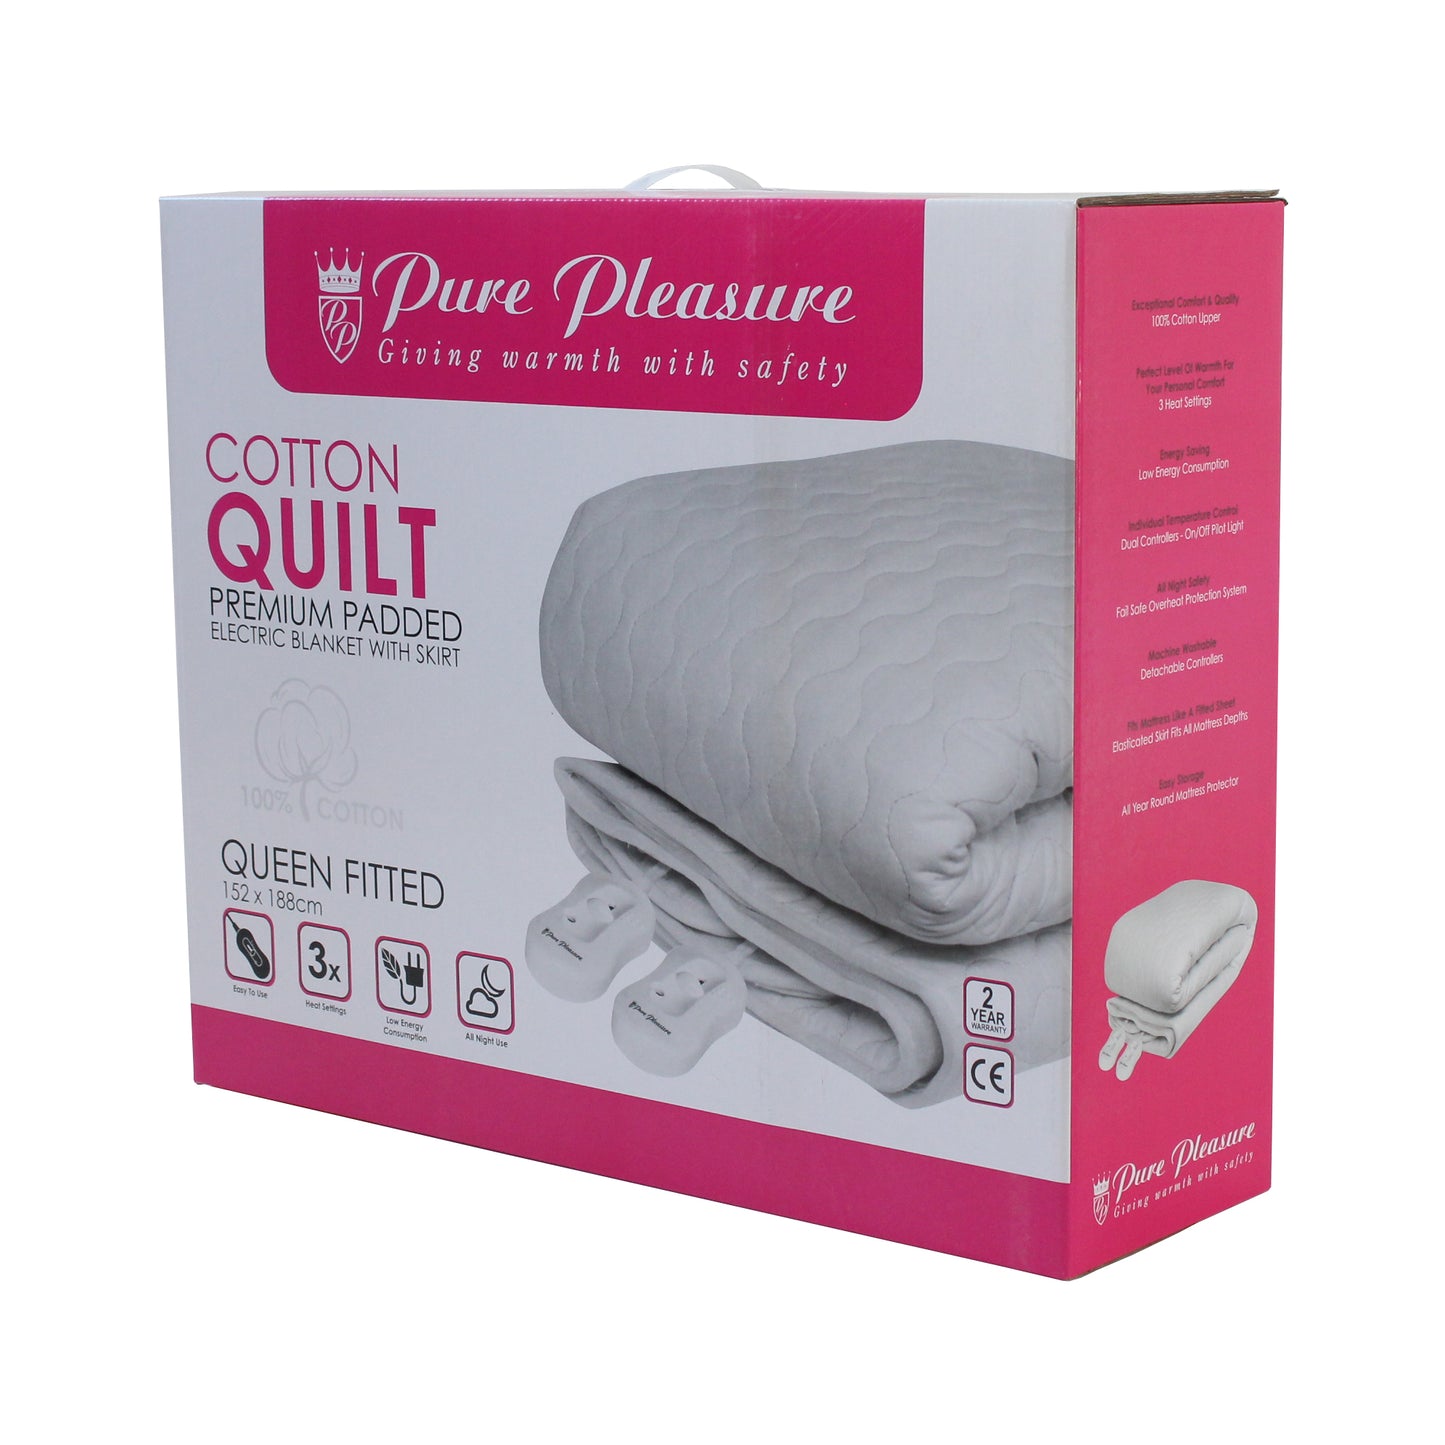 COTTON QUILT FULLY FITTED ELECTRIC BLANKET RANGE